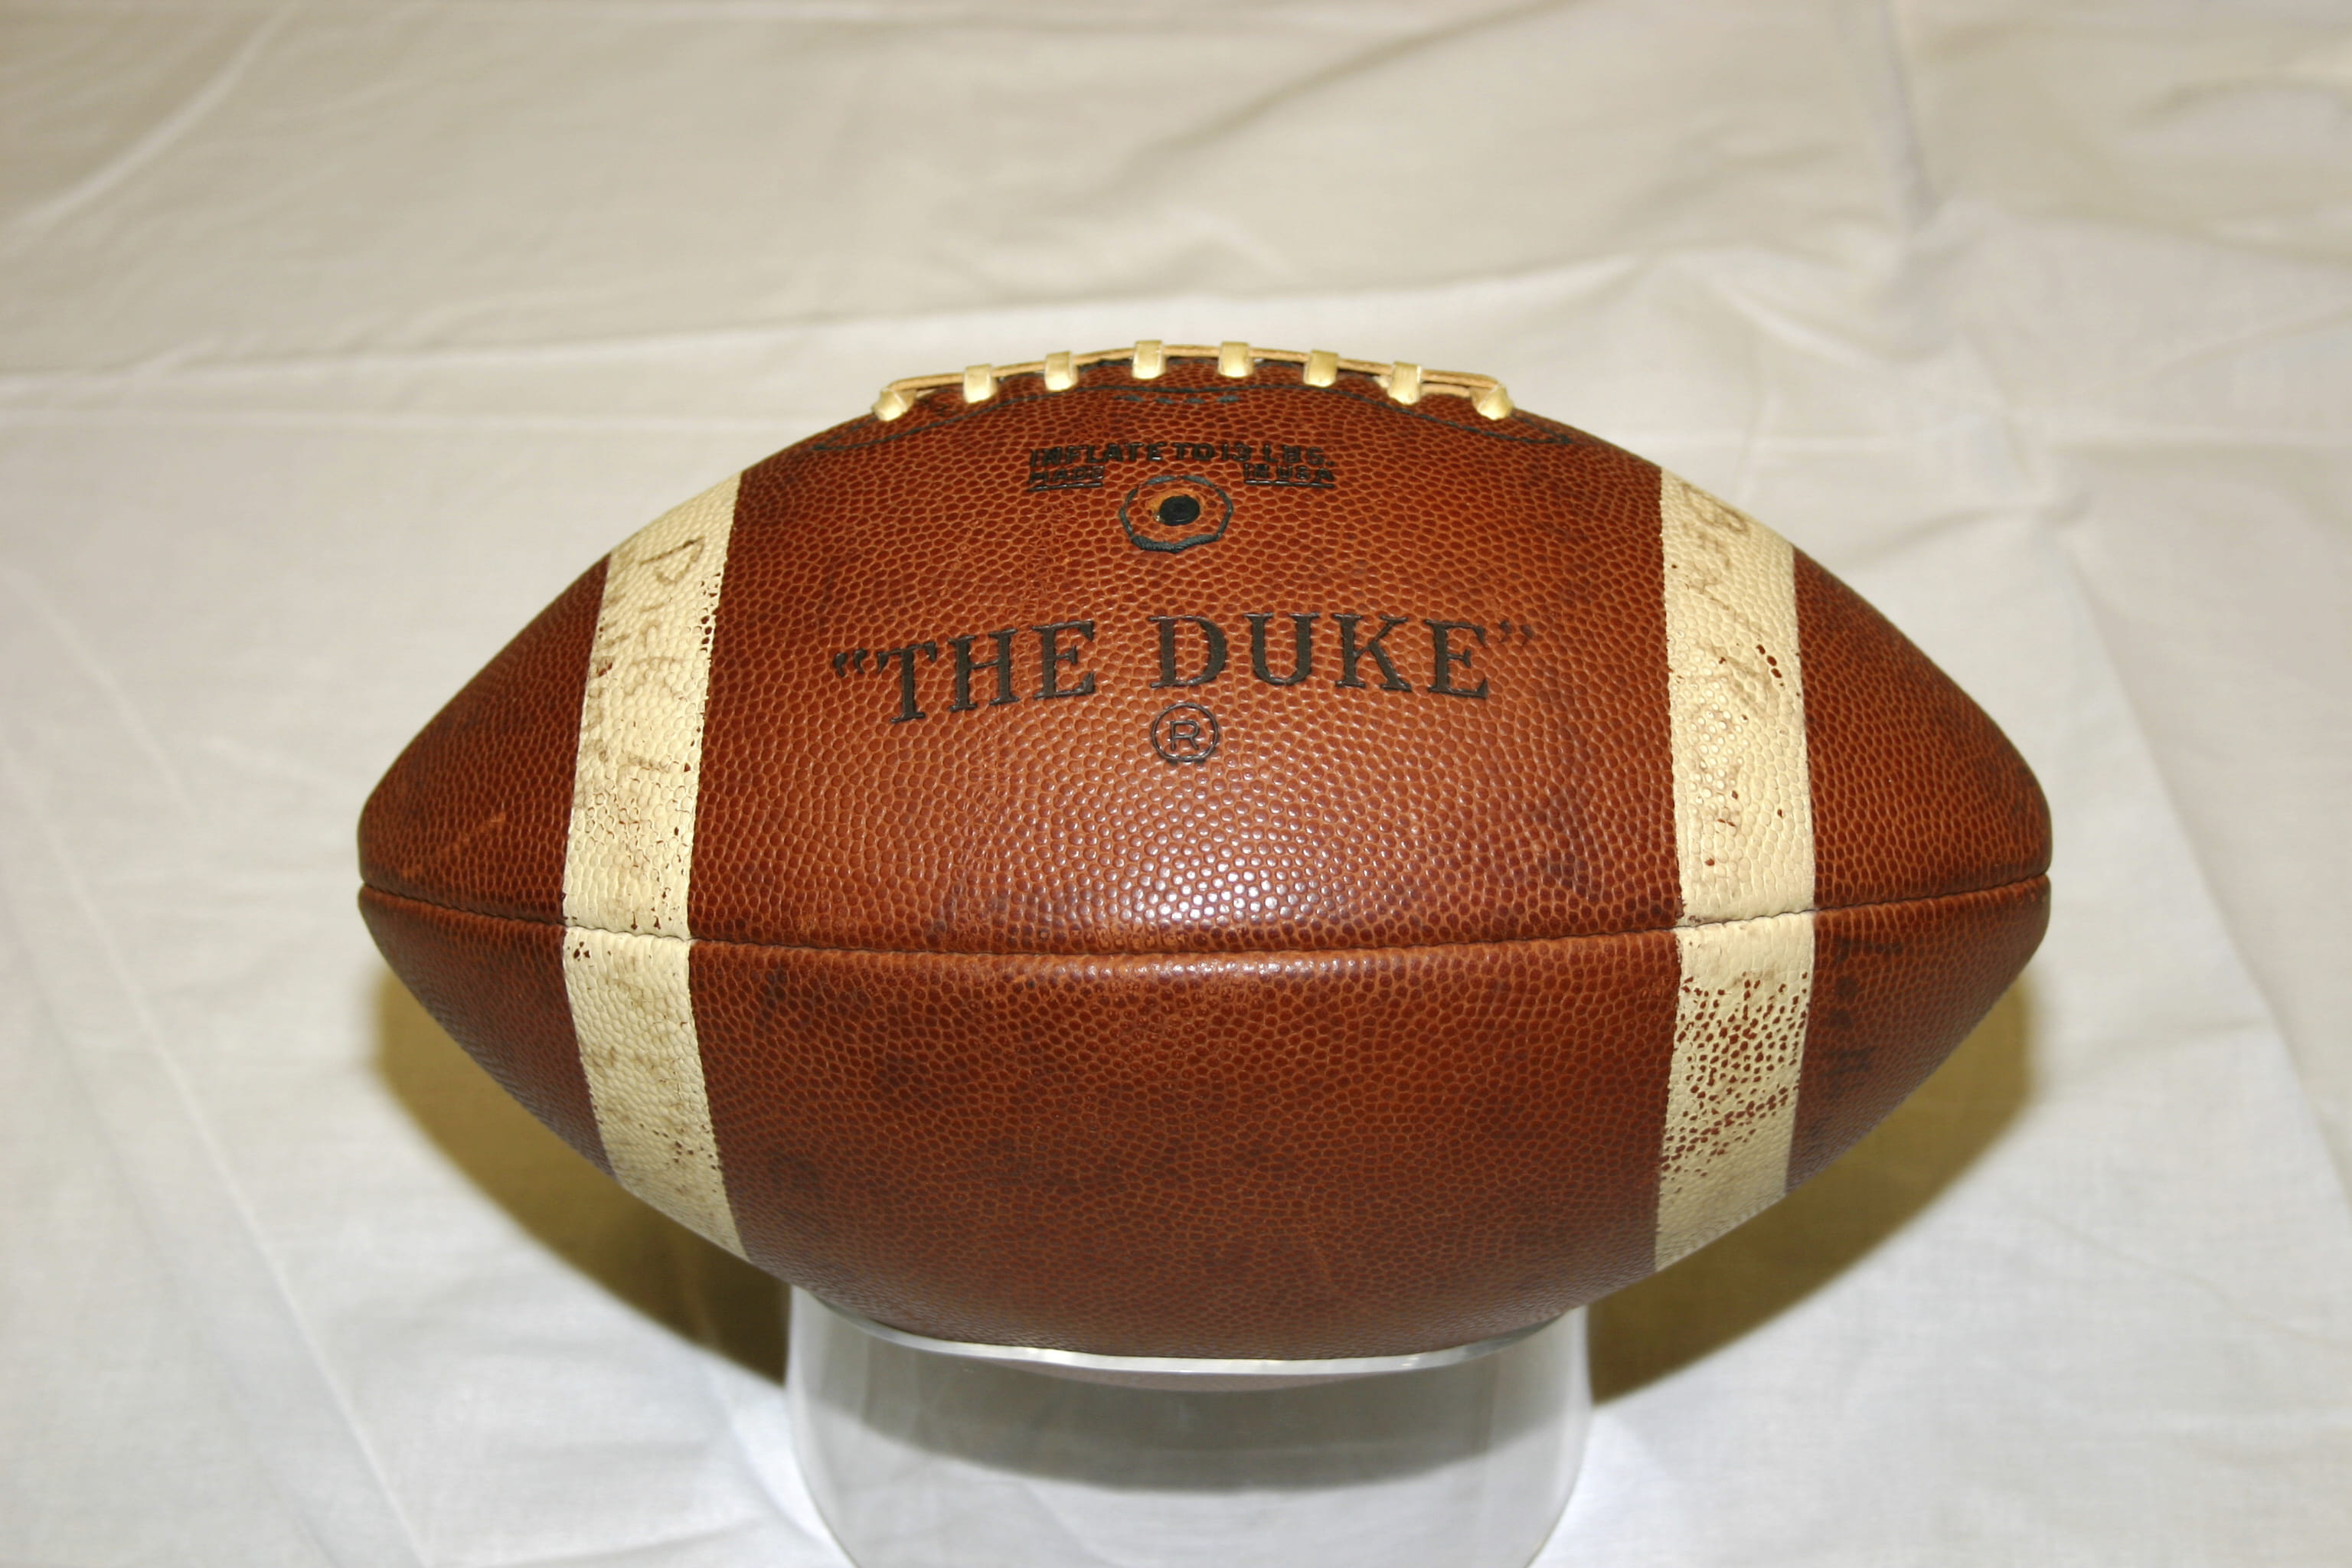 "The Duke" sported white stripes during night games starting in 1956.